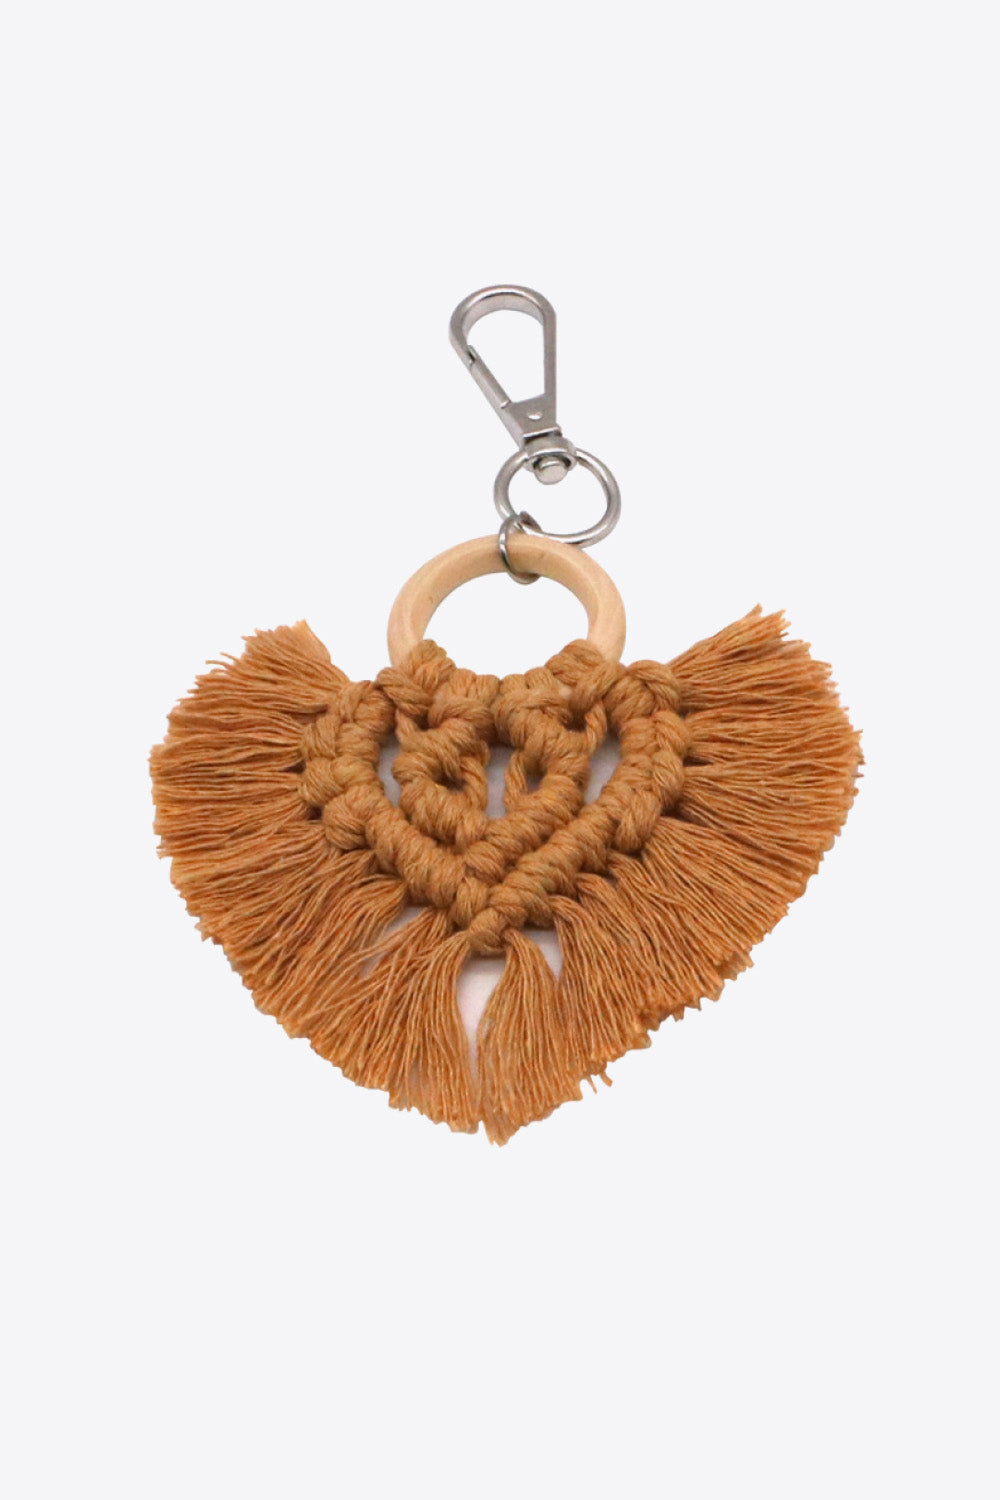 Trendsi Cupid Beauty Supplies Caramel / One Size Keychains Assorted 4-Pack Heart-Shaped Macrame Fringe Keychain